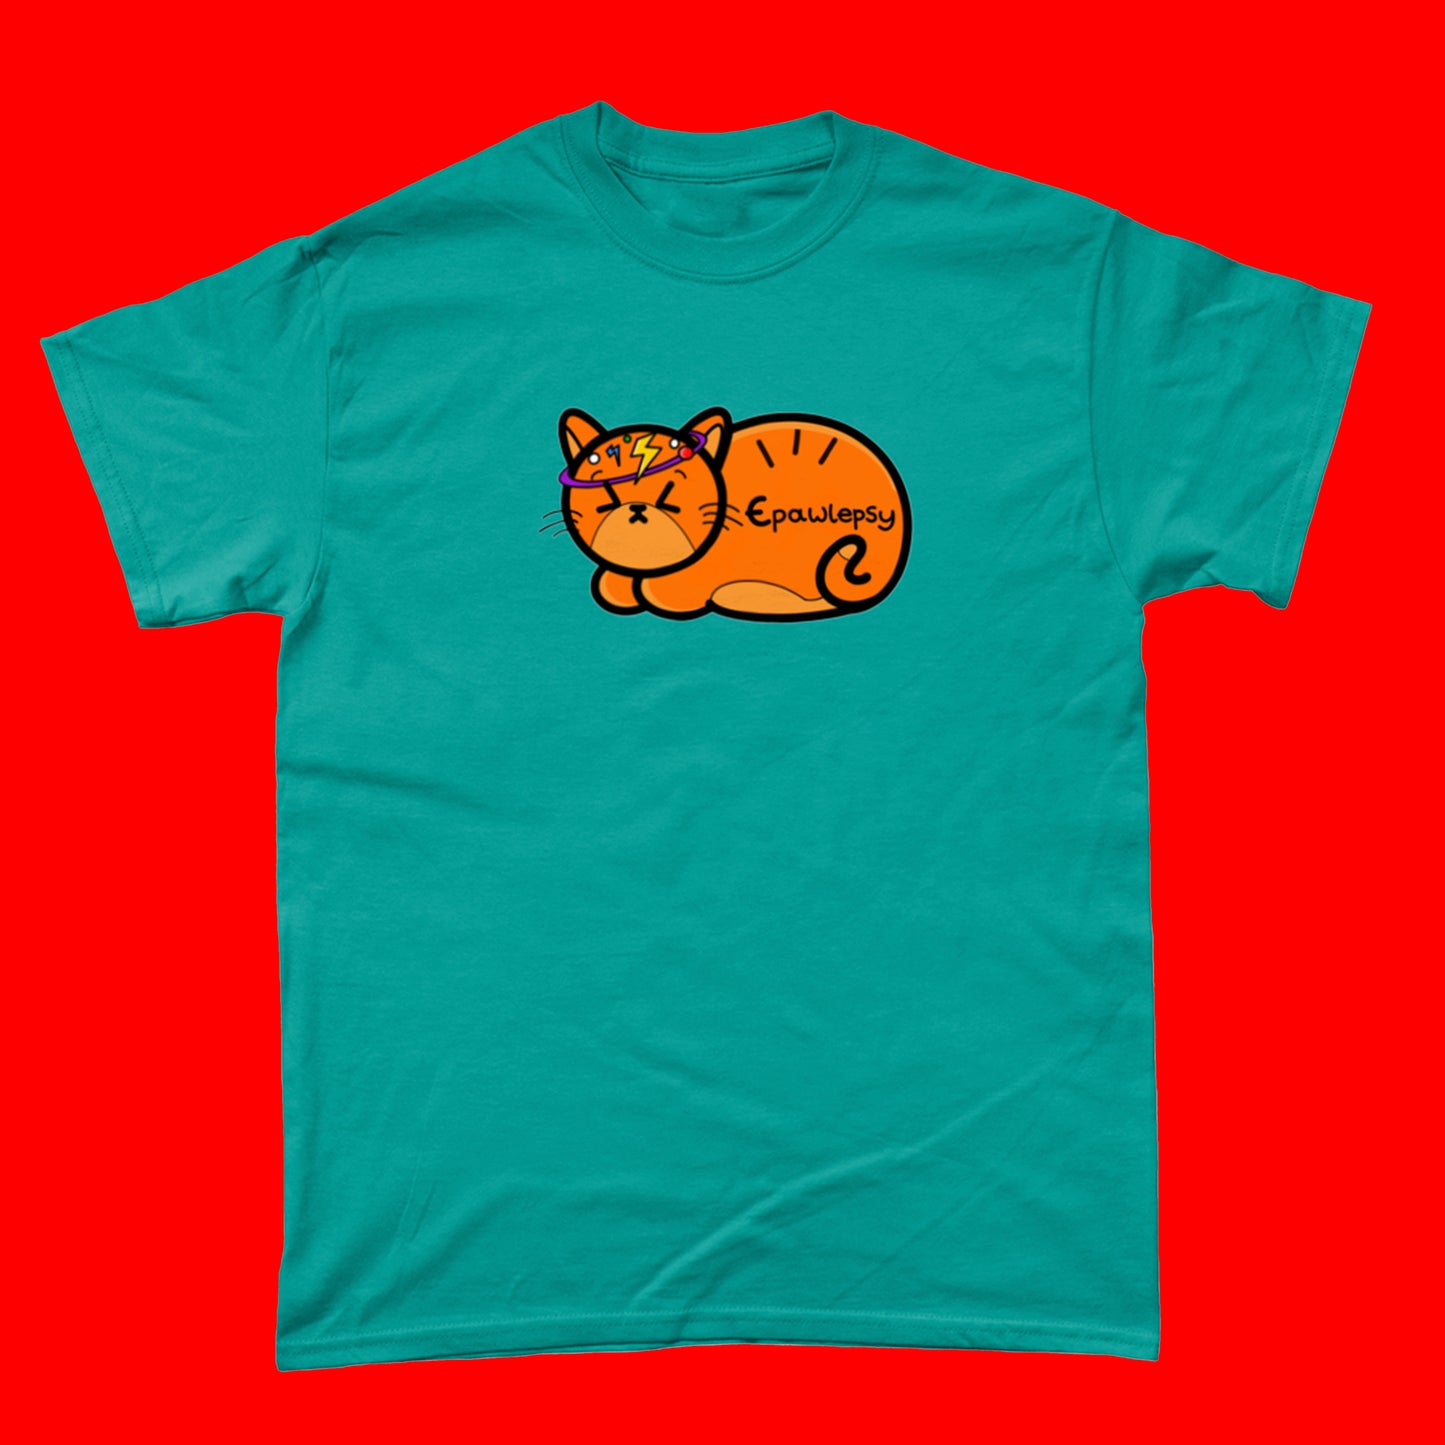 Epawlepsy Tee - Epilepsy. The antique jade cotton t-shirt is a ginger cat with eyes scrunched closed and symbols to represent a dizzy spell drawn across his head. Epawlepsy is written on the cats stomach. Tee is designed to raise awareness for epilepsy